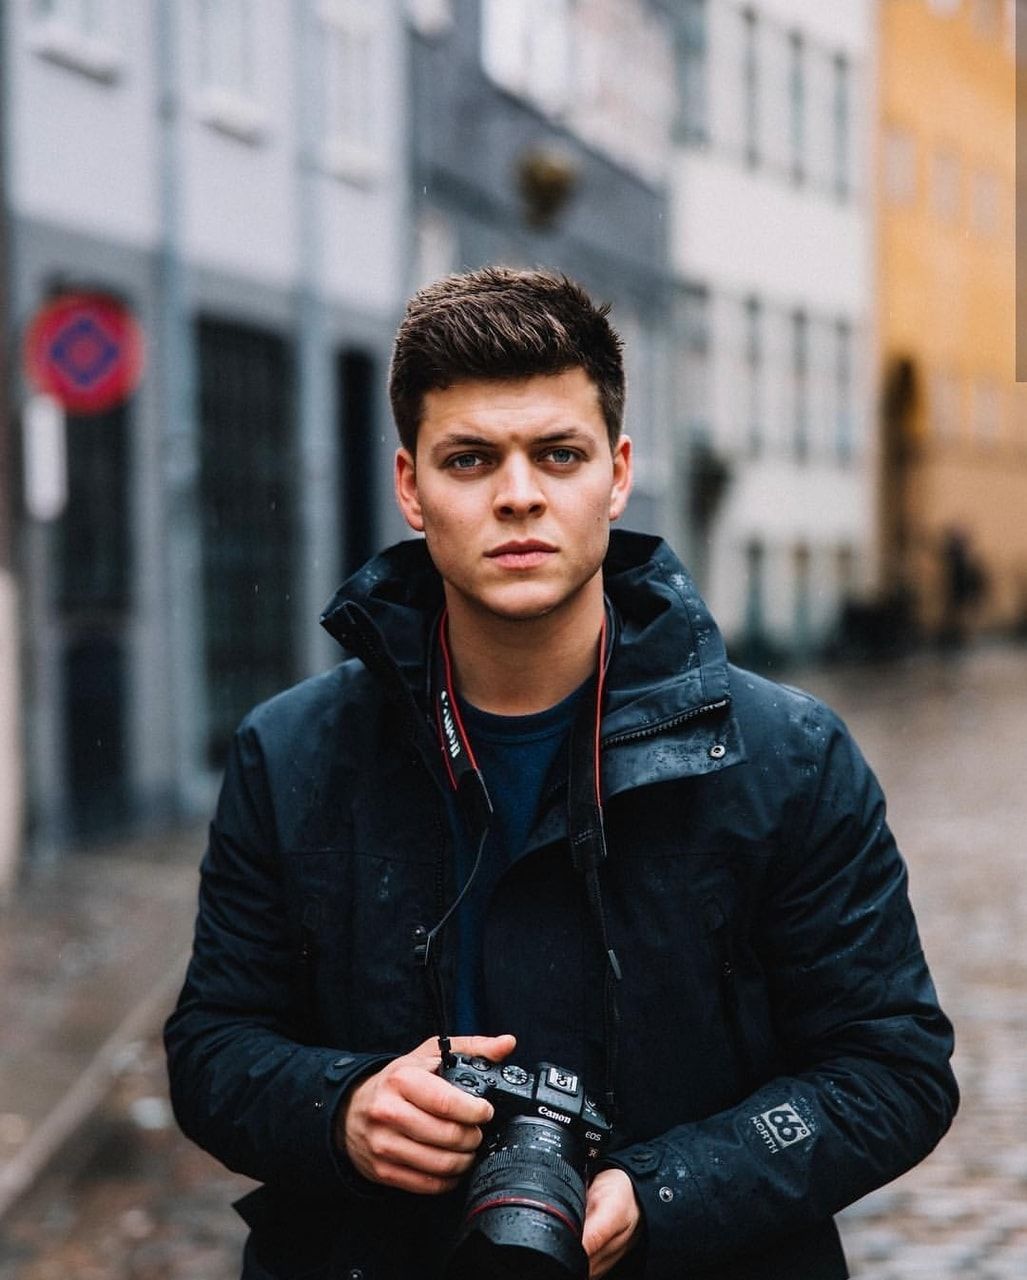 image about Alex Høgh Andersen. See more about vikings, ivar the boneless and alex hogh andersen